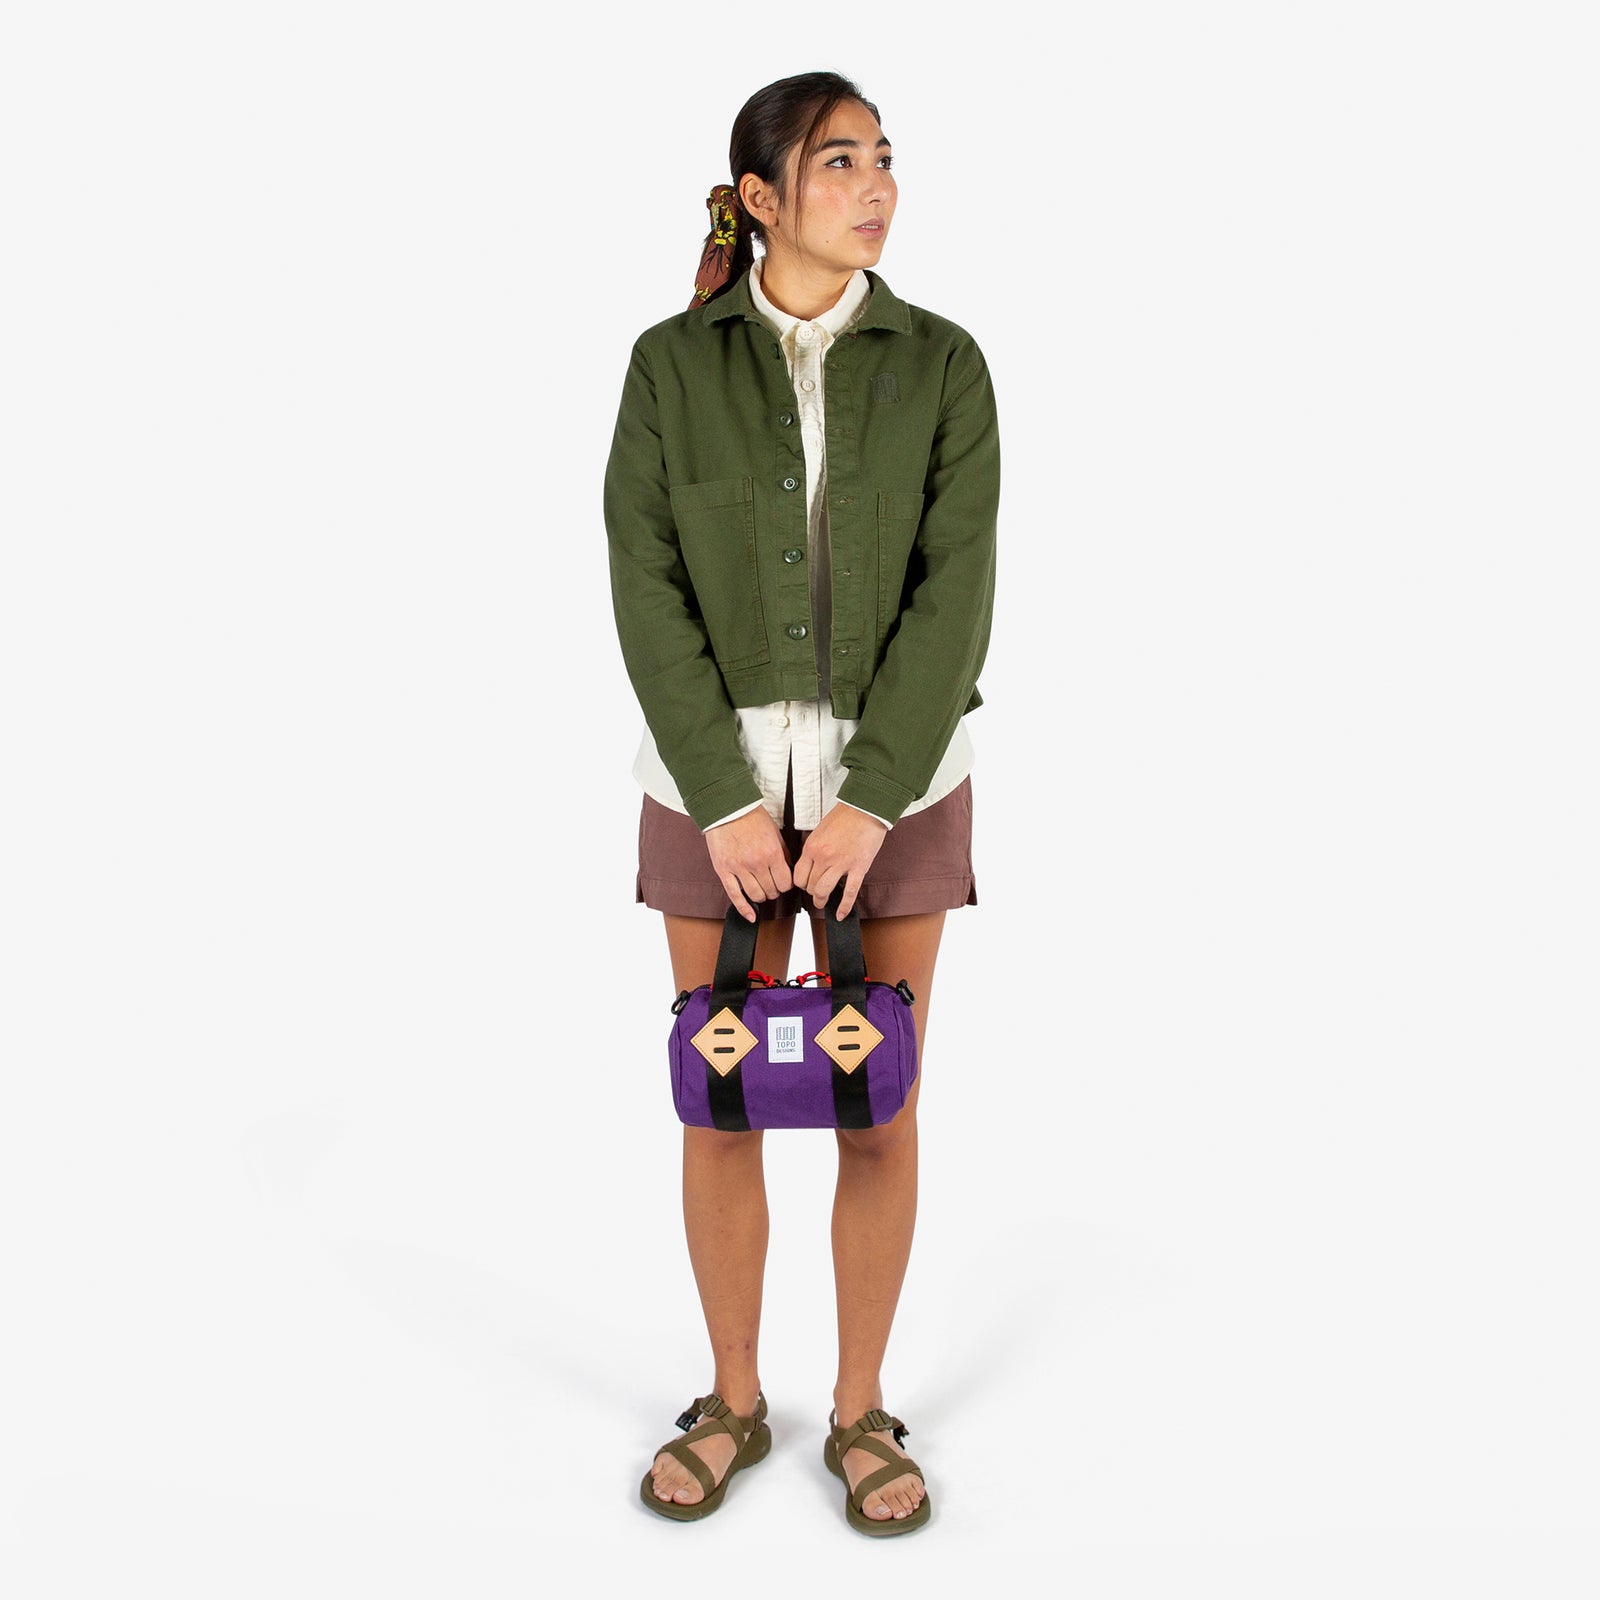 General shot of Topo Designs Mini Classic Duffel Bag shoulder crossbody purse in Purple held by model with top carry straps.